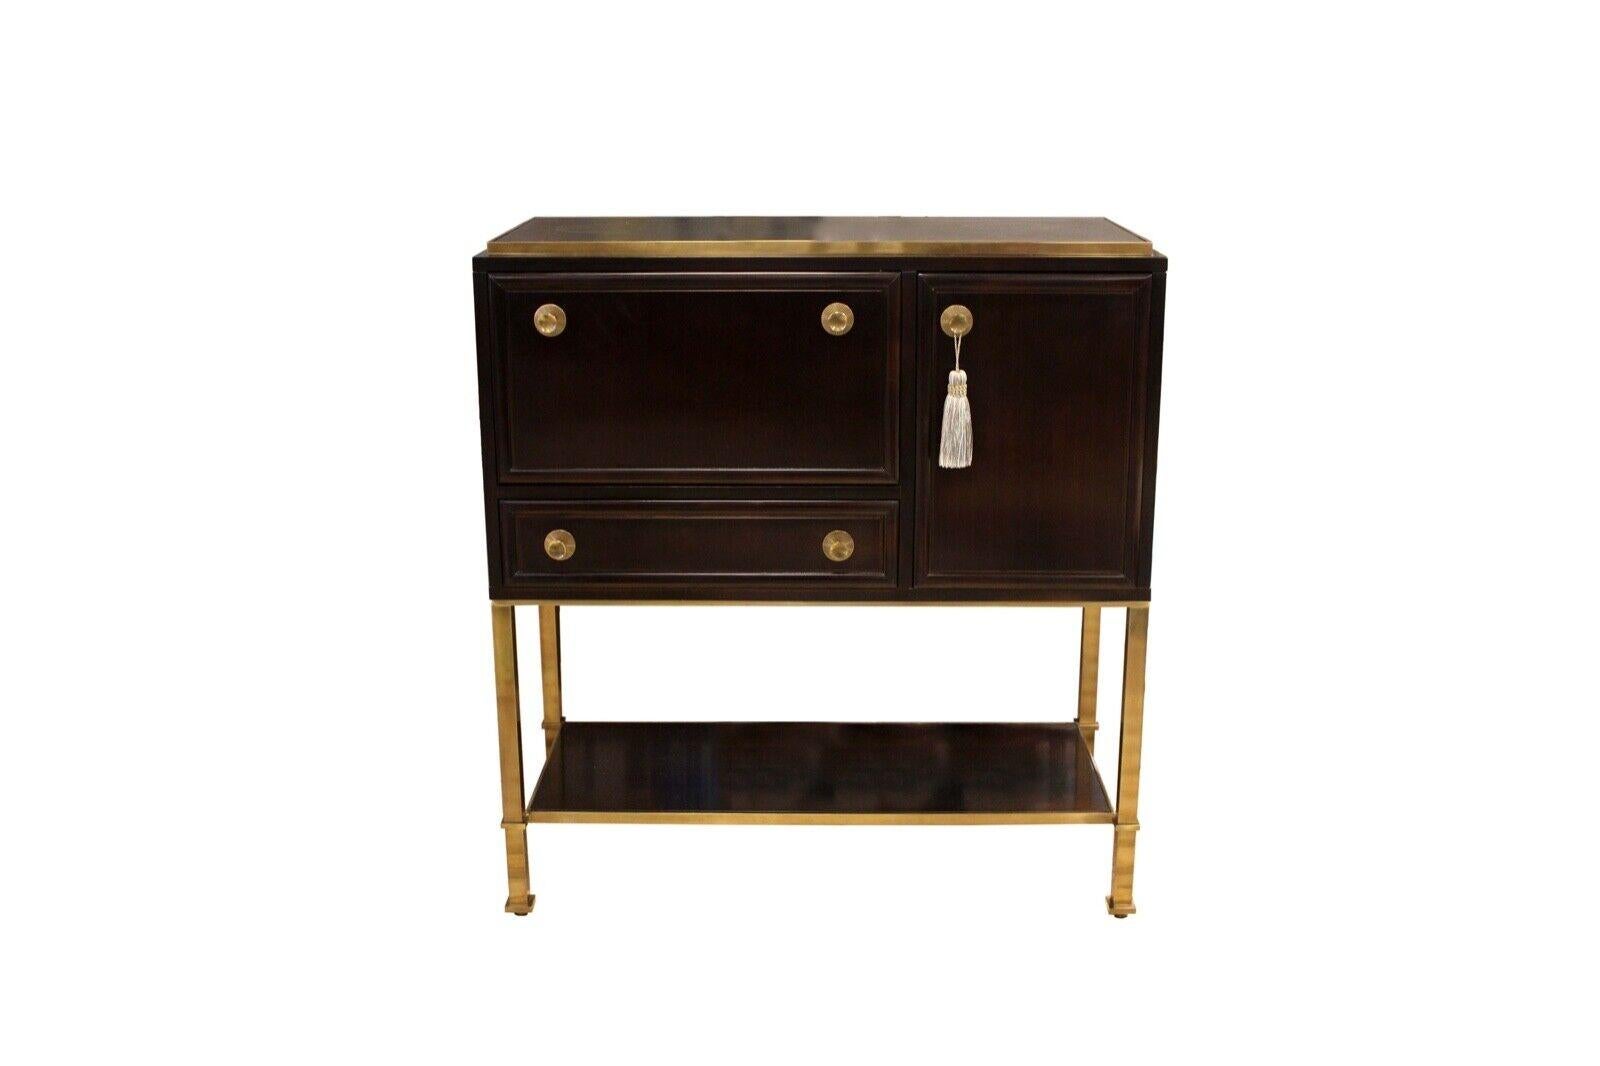 Le Shoppe Too presents a beautiful Baker Dansu Bar cabinet made of hardwood solid walnut & ebony veneer, brass hardware with polished bronze finish. One drop lid with mirror on case back panel. One drawer with liner. One door with adjustable shelf.